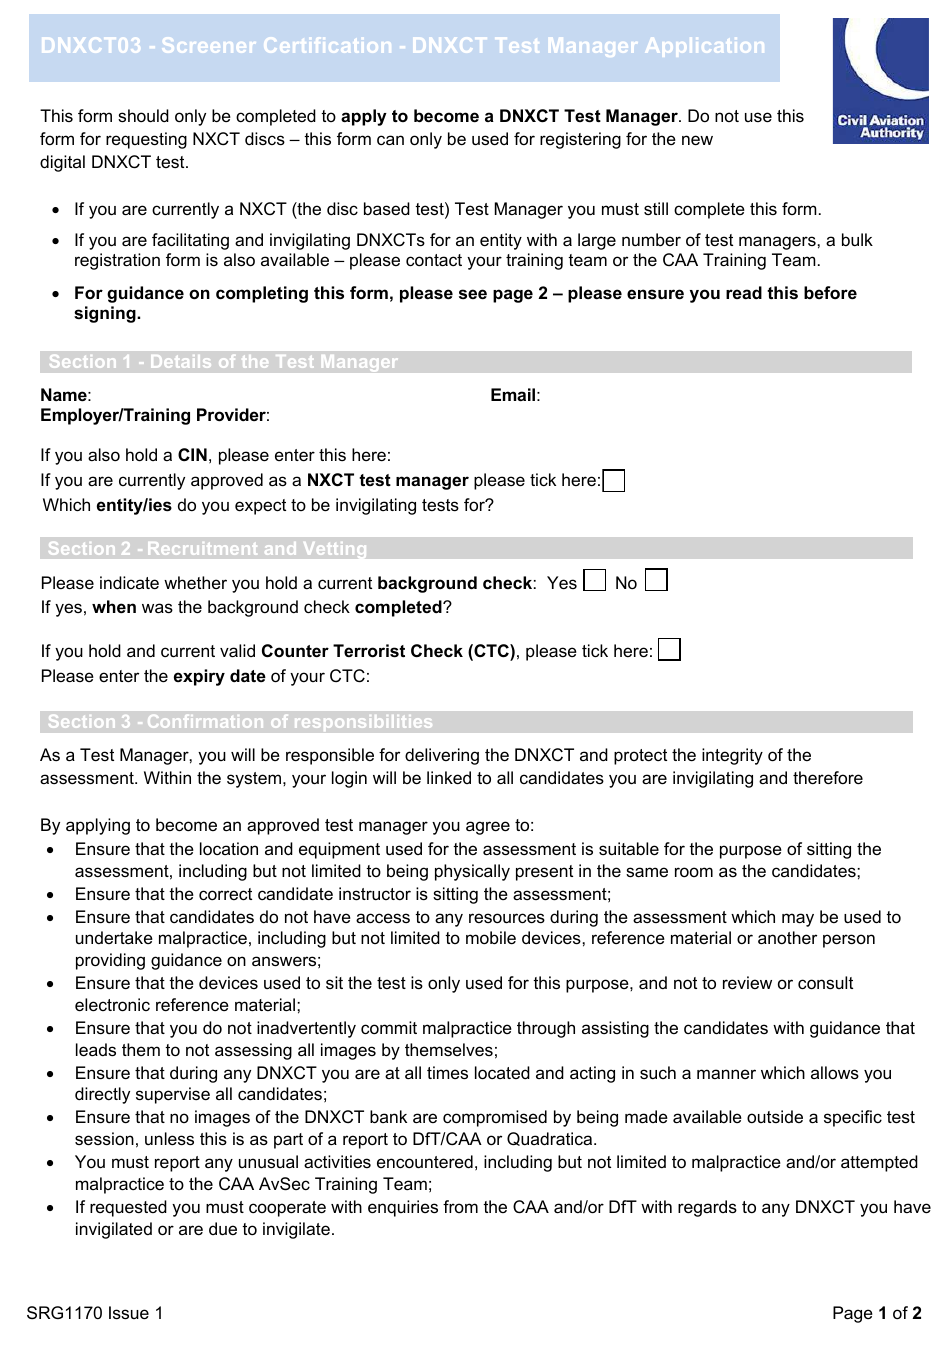 Form SRG1170 Screener Certification - Dnxct Test Manager Application (Individual) - United Kingdom, Page 1